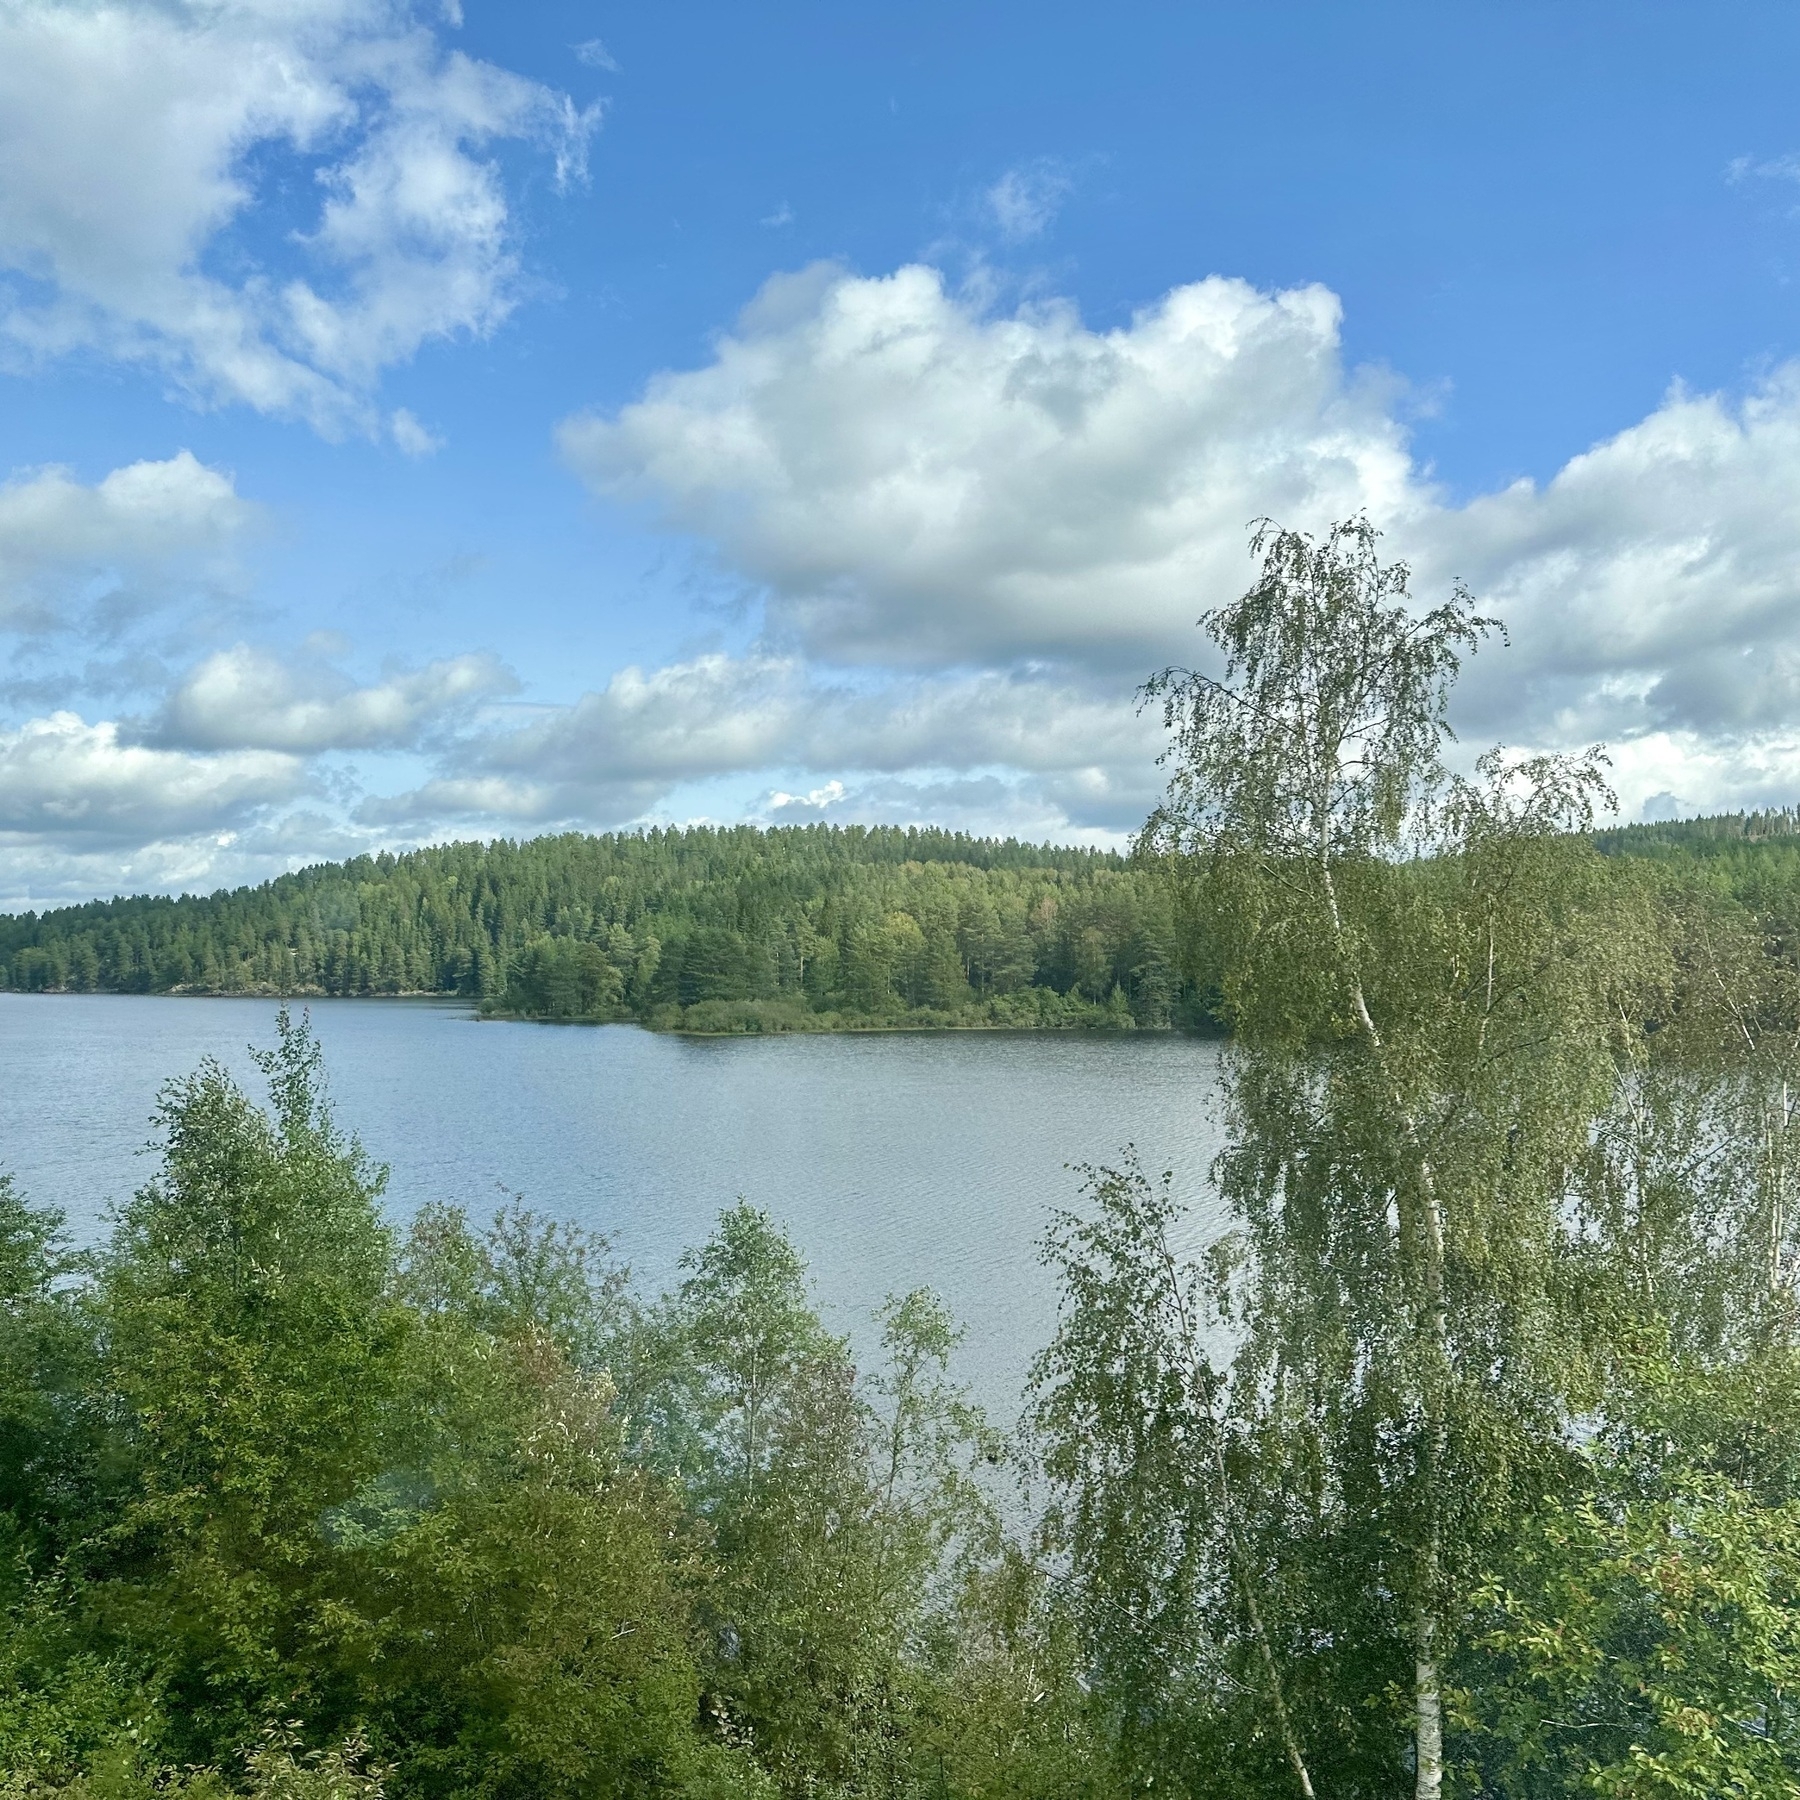 View of a lake with trees on the far shore below a blue sky with clouds. From the train to Stockholm from Oslo.